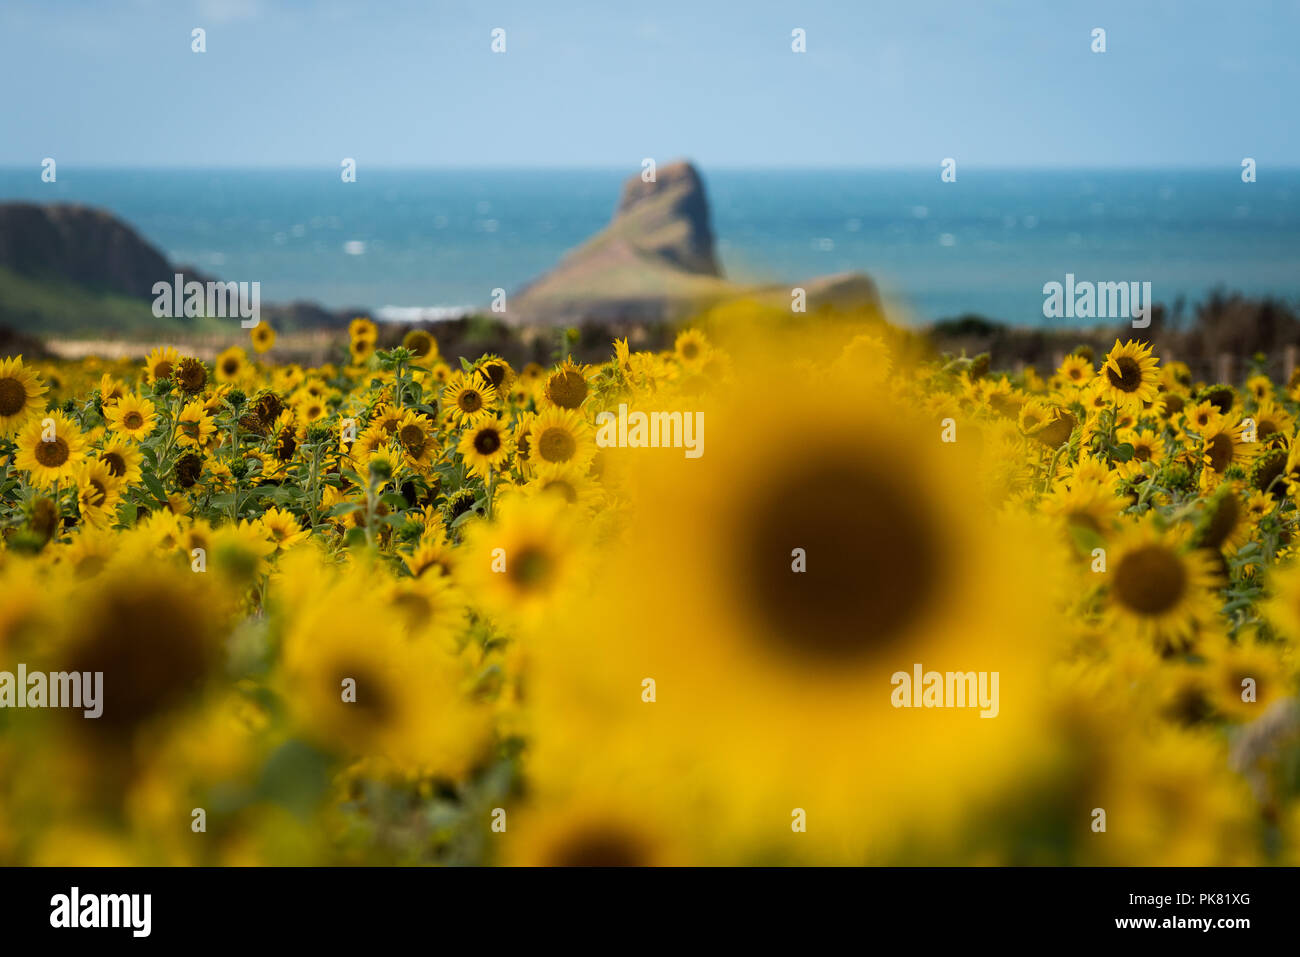 Sunflowers growing on the Gower peninsular by Rhossili Bay over looking Worms Head, Gower, Wales, UK Stock Photo